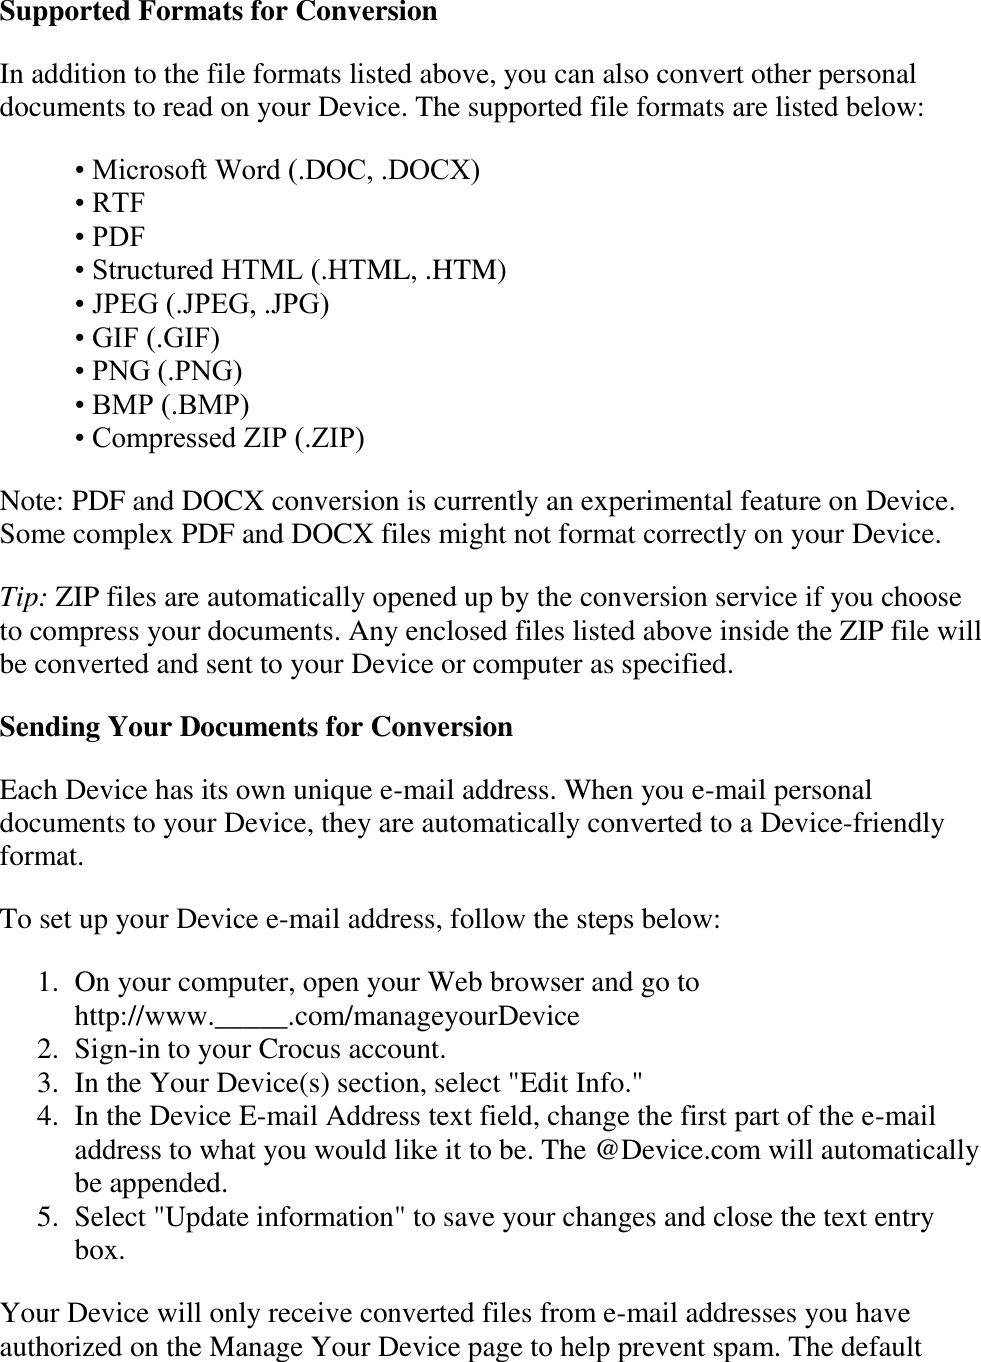   Supported Formats for Conversion In addition to the file formats listed above, you can also convert other personal documents to read on your Device. The supported file formats are listed below: • Microsoft Word (.DOC, .DOCX) • RTF • PDF • Structured HTML (.HTML, .HTM) • JPEG (.JPEG, .JPG) • GIF (.GIF) • PNG (.PNG) • BMP (.BMP) • Compressed ZIP (.ZIP) Note: PDF and DOCX conversion is currently an experimental feature on Device. Some complex PDF and DOCX files might not format correctly on your Device. Tip: ZIP files are automatically opened up by the conversion service if you choose to compress your documents. Any enclosed files listed above inside the ZIP file will be converted and sent to your Device or computer as specified. Sending Your Documents for Conversion Each Device has its own unique e-mail address. When you e-mail personal documents to your Device, they are automatically converted to a Device-friendly format.  To set up your Device e-mail address, follow the steps below: 1. On your computer, open your Web browser and go to  http://www._____.com/manageyourDevice  2. Sign-in to your Crocus account.  3. In the Your Device(s) section, select &quot;Edit Info.&quot;  4. In the Device E-mail Address text field, change the first part of the e-mail address to what you would like it to be. The @Device.com will automatically be appended.  5. Select &quot;Update information&quot; to save your changes and close the text entry box.  Your Device will only receive converted files from e-mail addresses you have authorized on the Manage Your Device page to help prevent spam. The default 